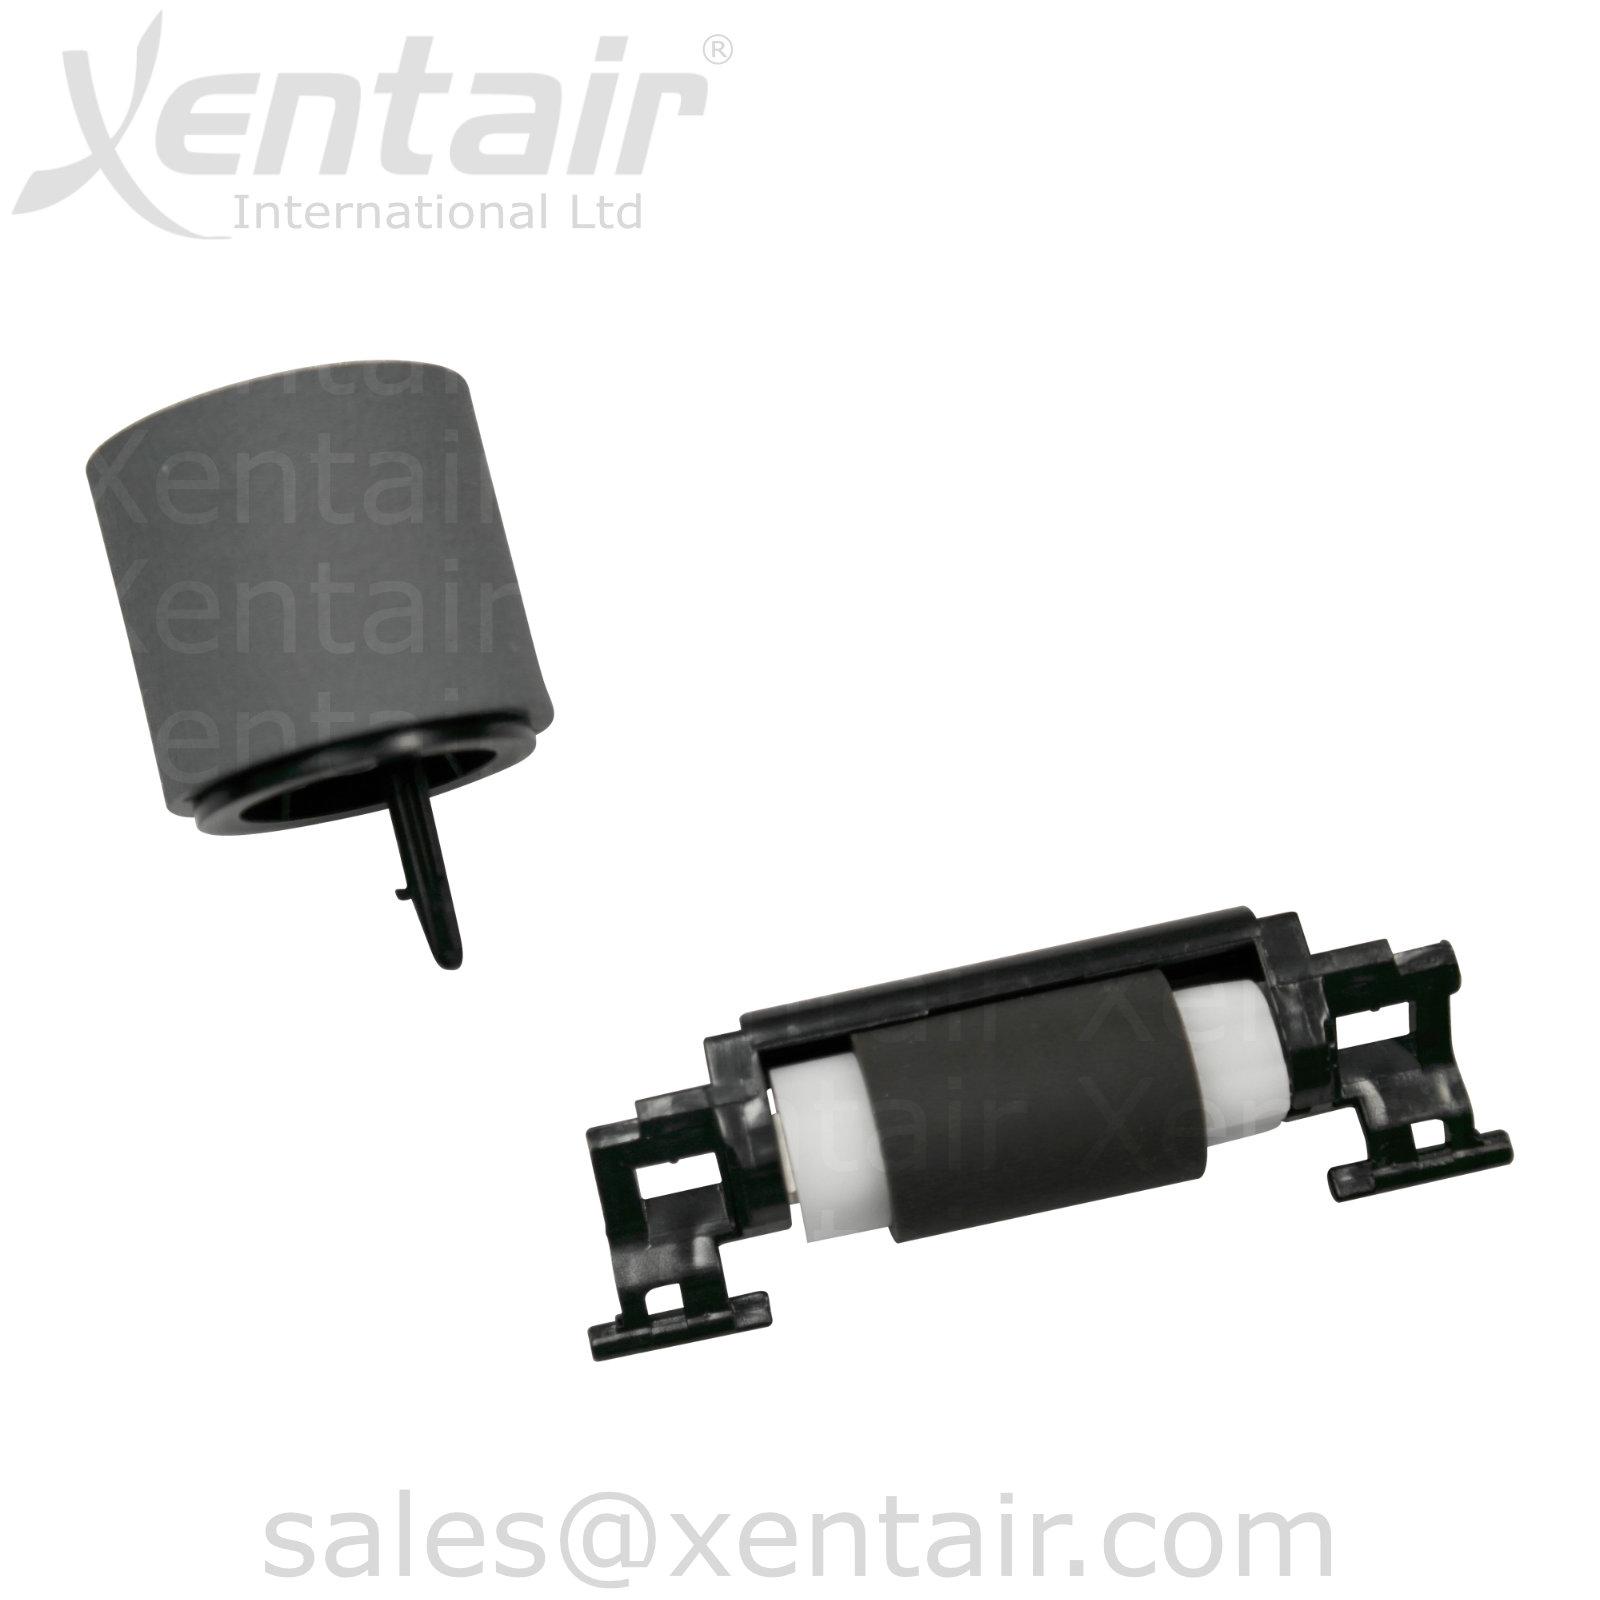 Compatible Feed Roll Maintenance Kit For Use In The Xerox® Phaser™ 3330 WorkCentre™ 3335 3345 108R01470 108R1470